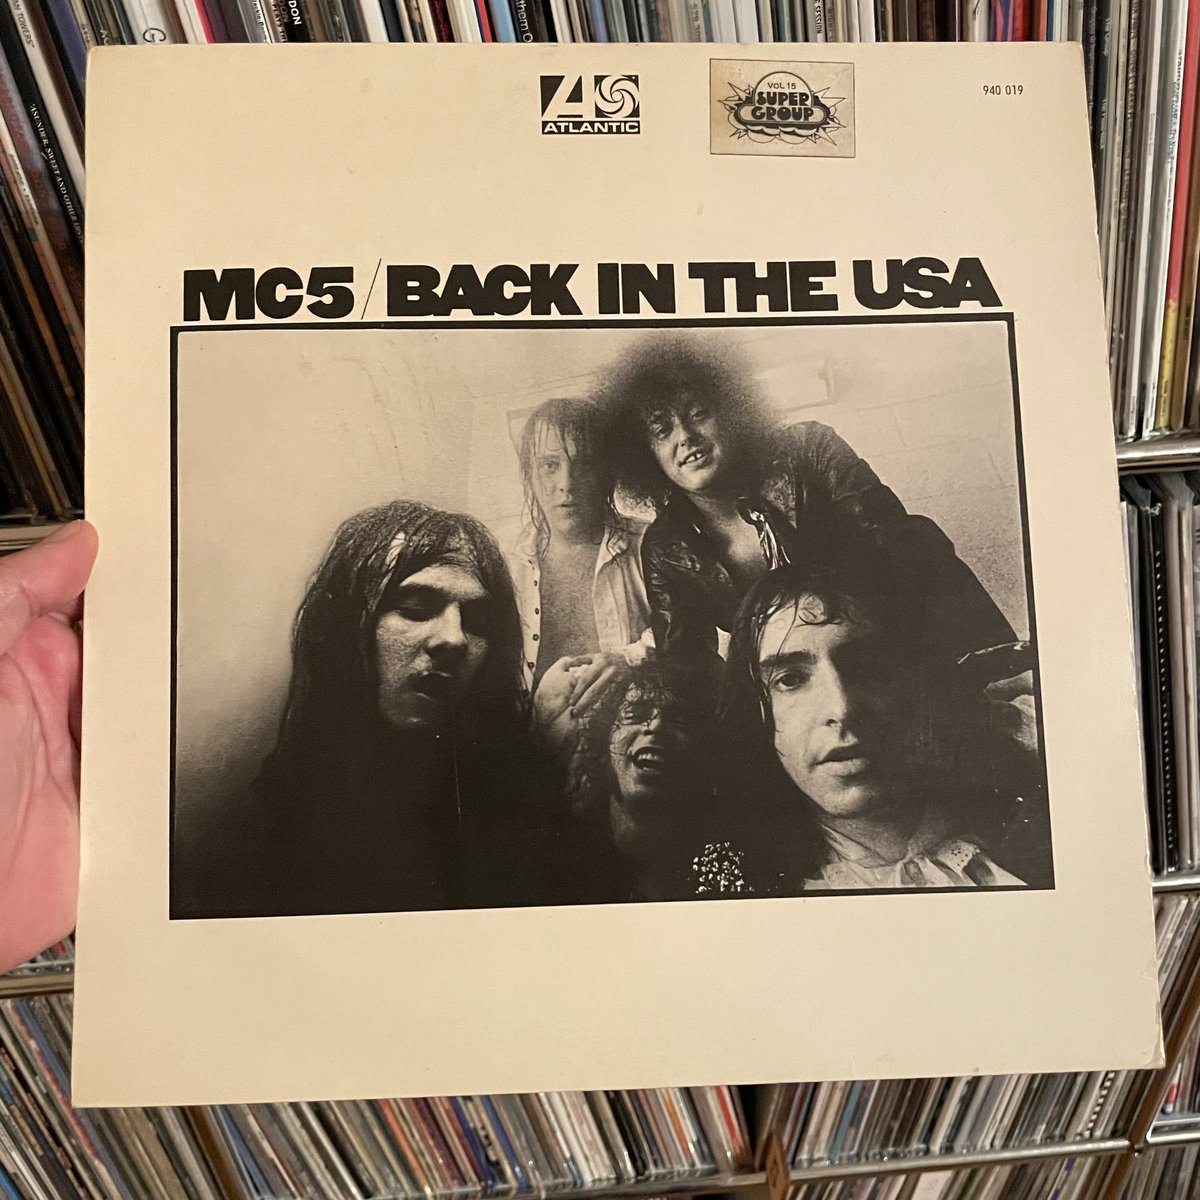 And now, Back in the USA / MC 5 French first pressing.